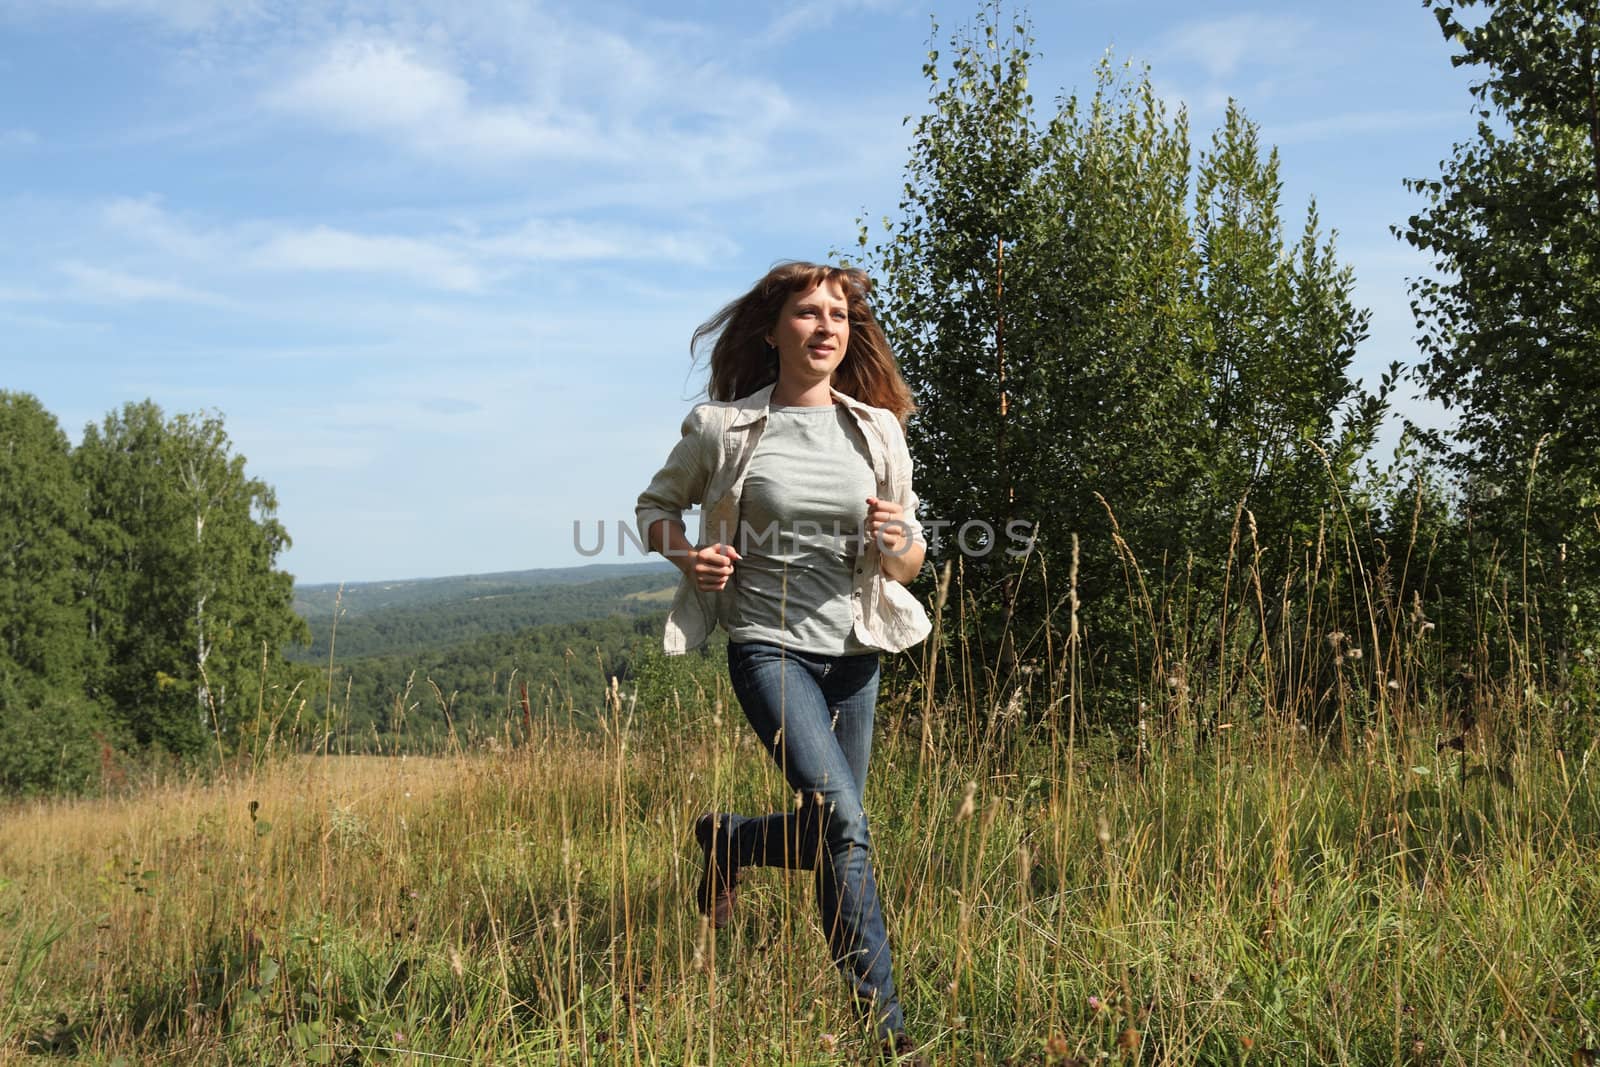 woman runs on the edge of the forest

